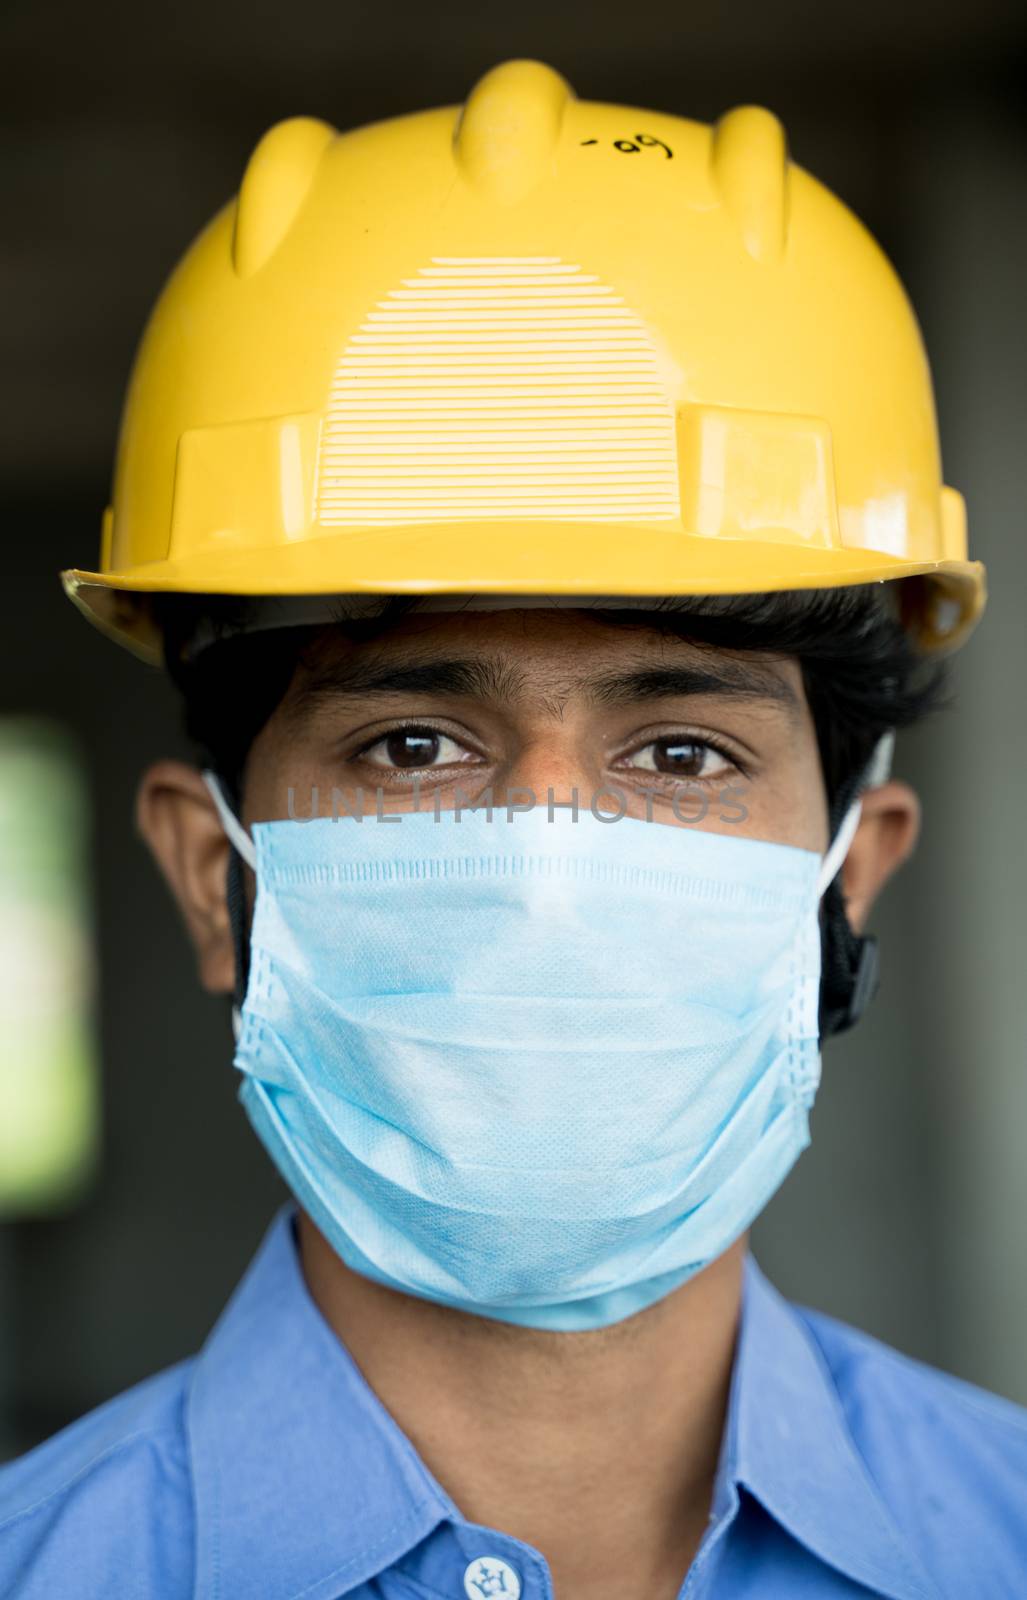 Head shot of Construction worker, reopening of construction sites or industry - construction worker in a construction helmet with medical mask due to coronavirus or covid-19 pandemic. by lakshmiprasad.maski@gmai.com